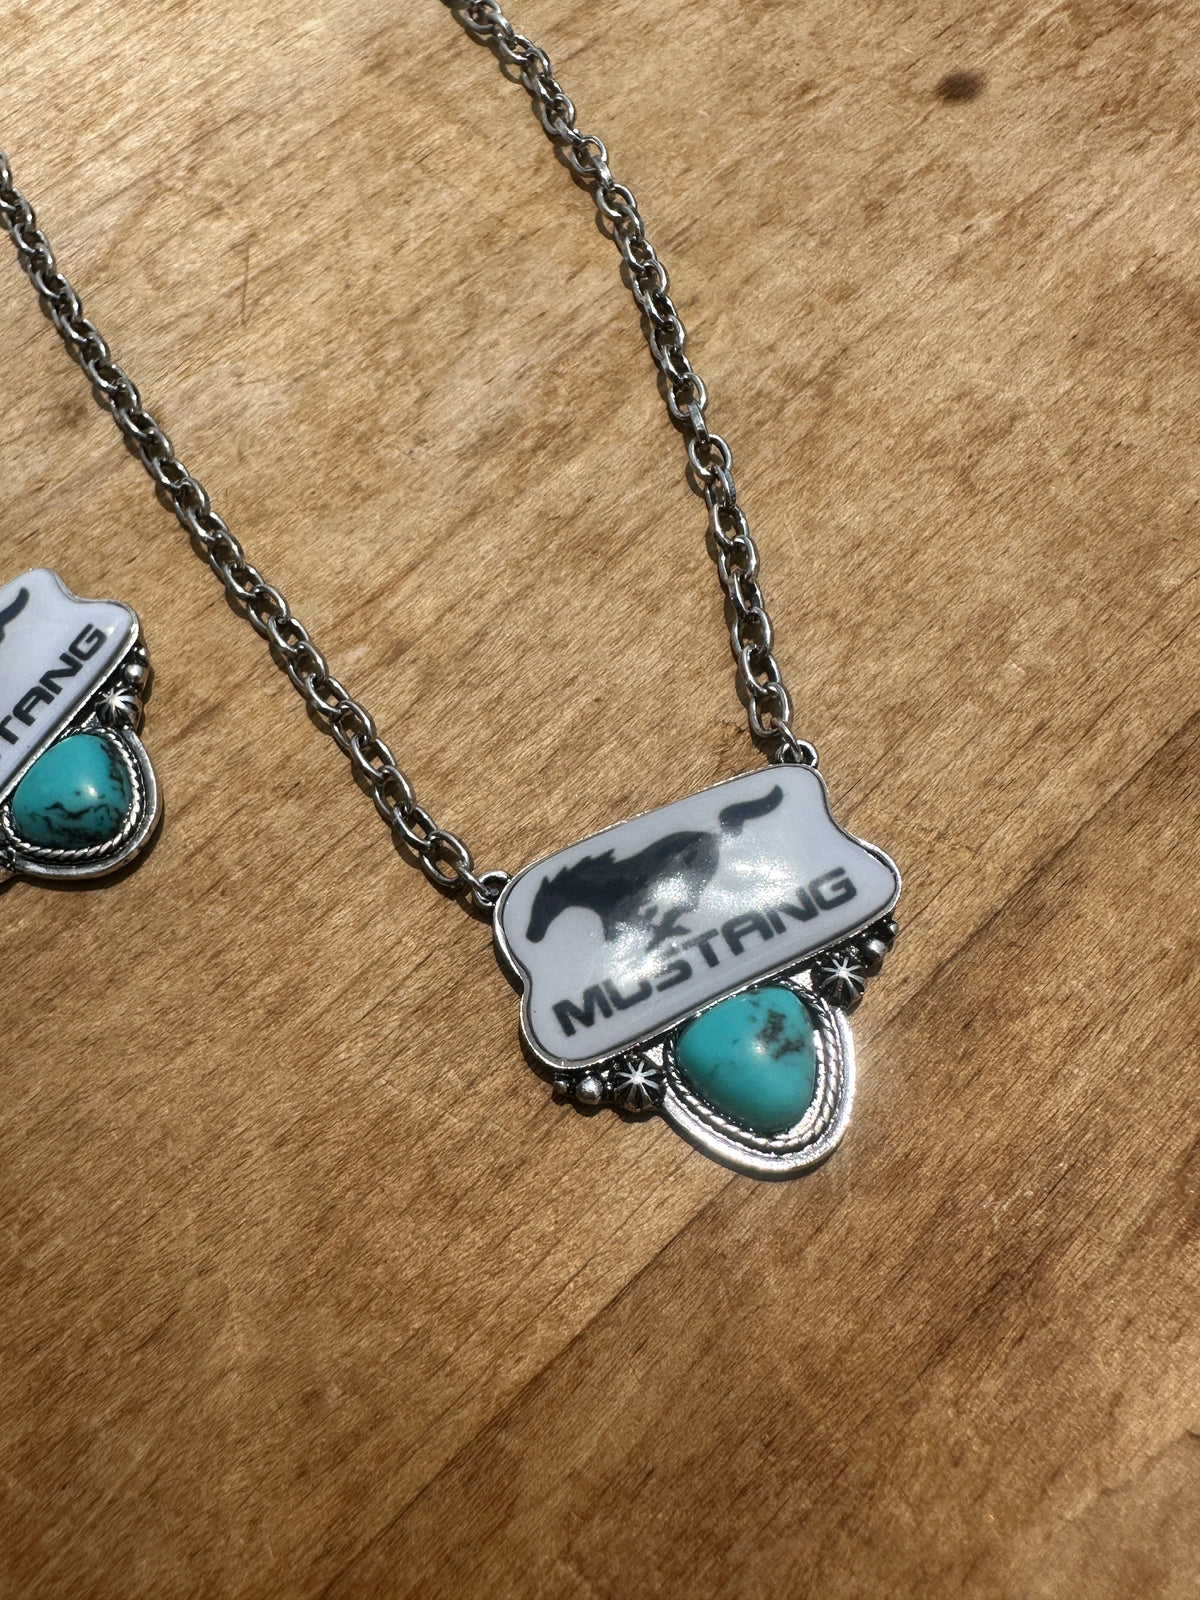 Mustang Necklace